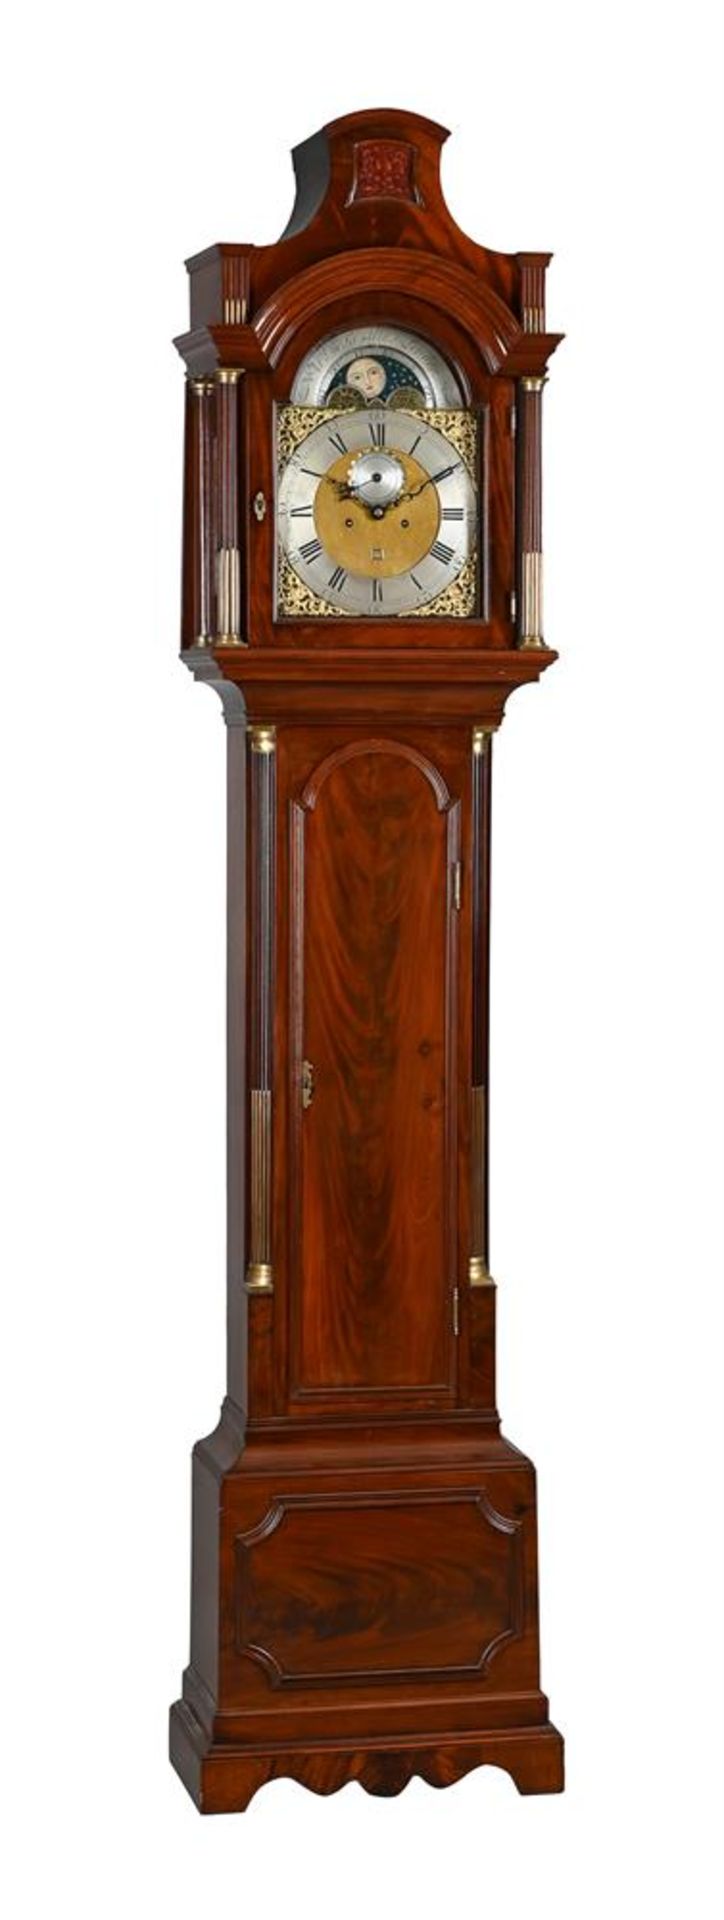 A GEORGE III MAHOGANY EIGHT-DAY LONGCASE CLOCK WITH MOONPHASE